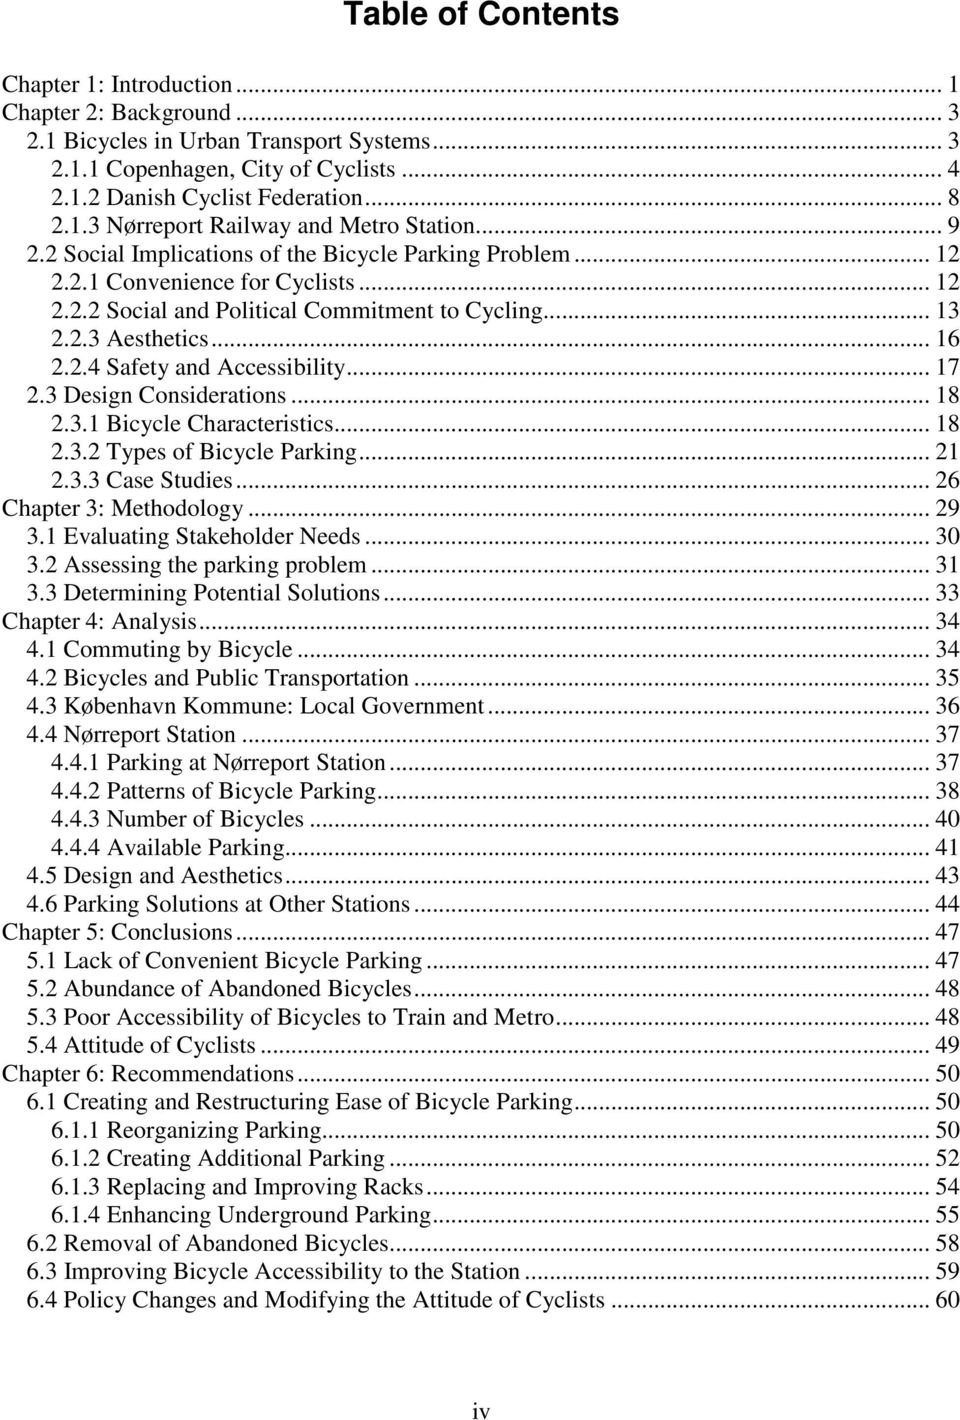 .. 17 2.3 Design Considerations... 18 2.3.1 Bicycle Characteristics... 18 2.3.2 Types of Bicycle Parking... 21 2.3.3 Case Studies... 26 Chapter 3: Methodology... 29 3.1 Evaluating Stakeholder Needs.